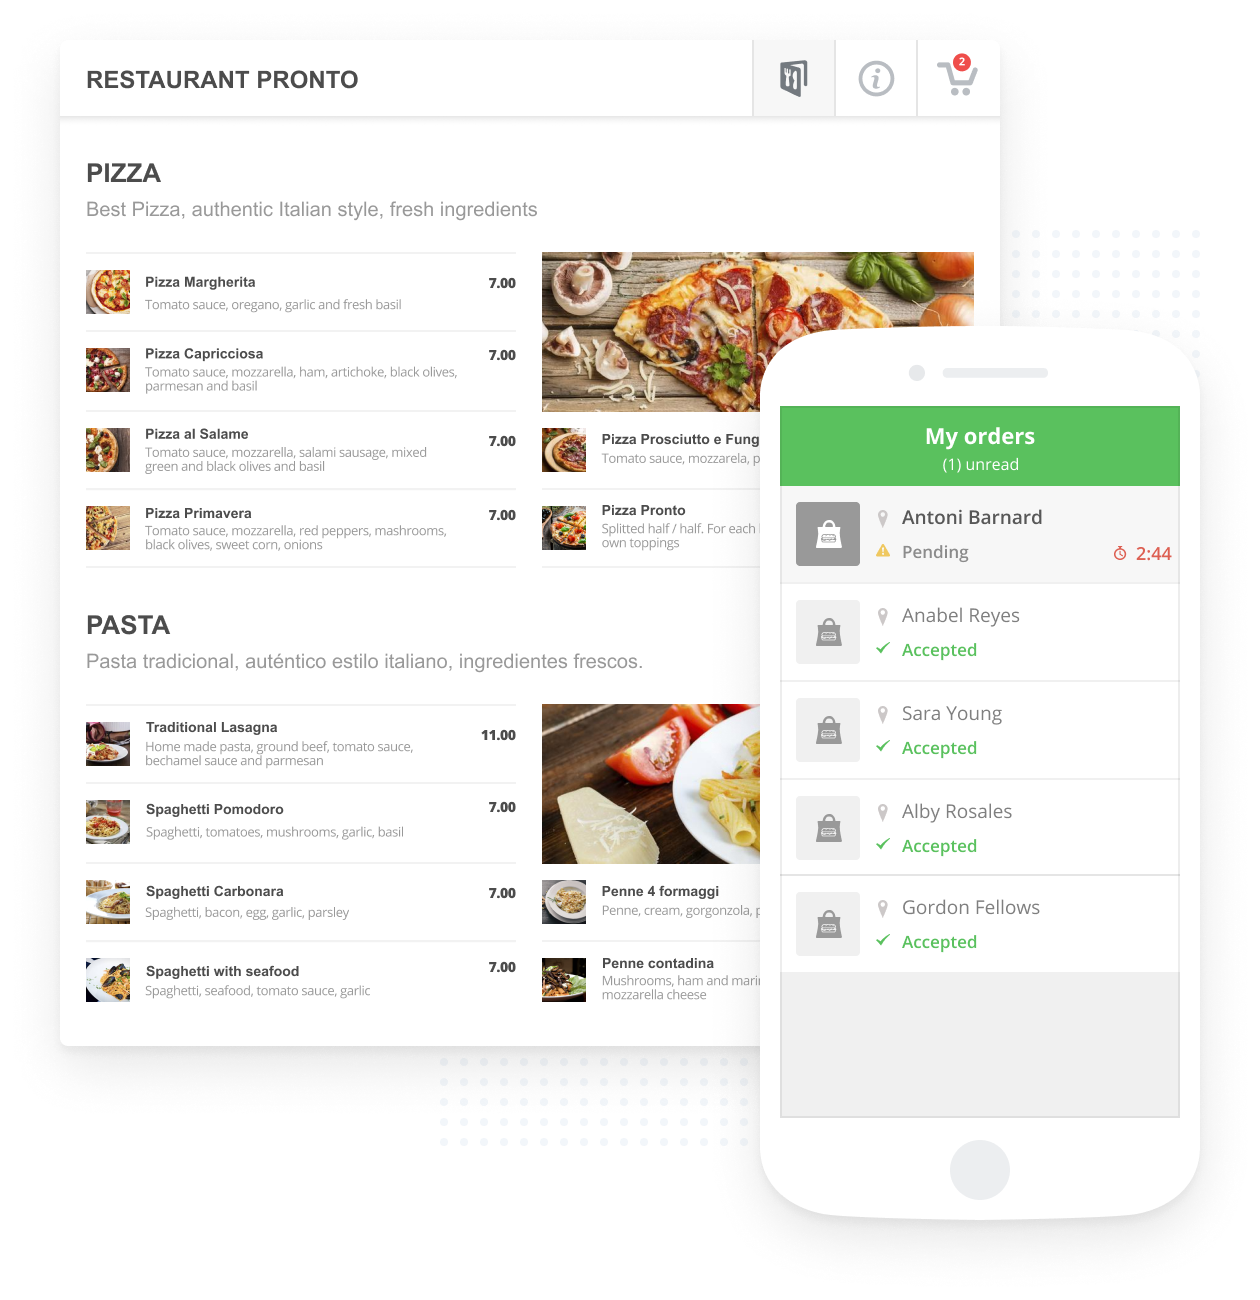 SLG's Food Ordering System